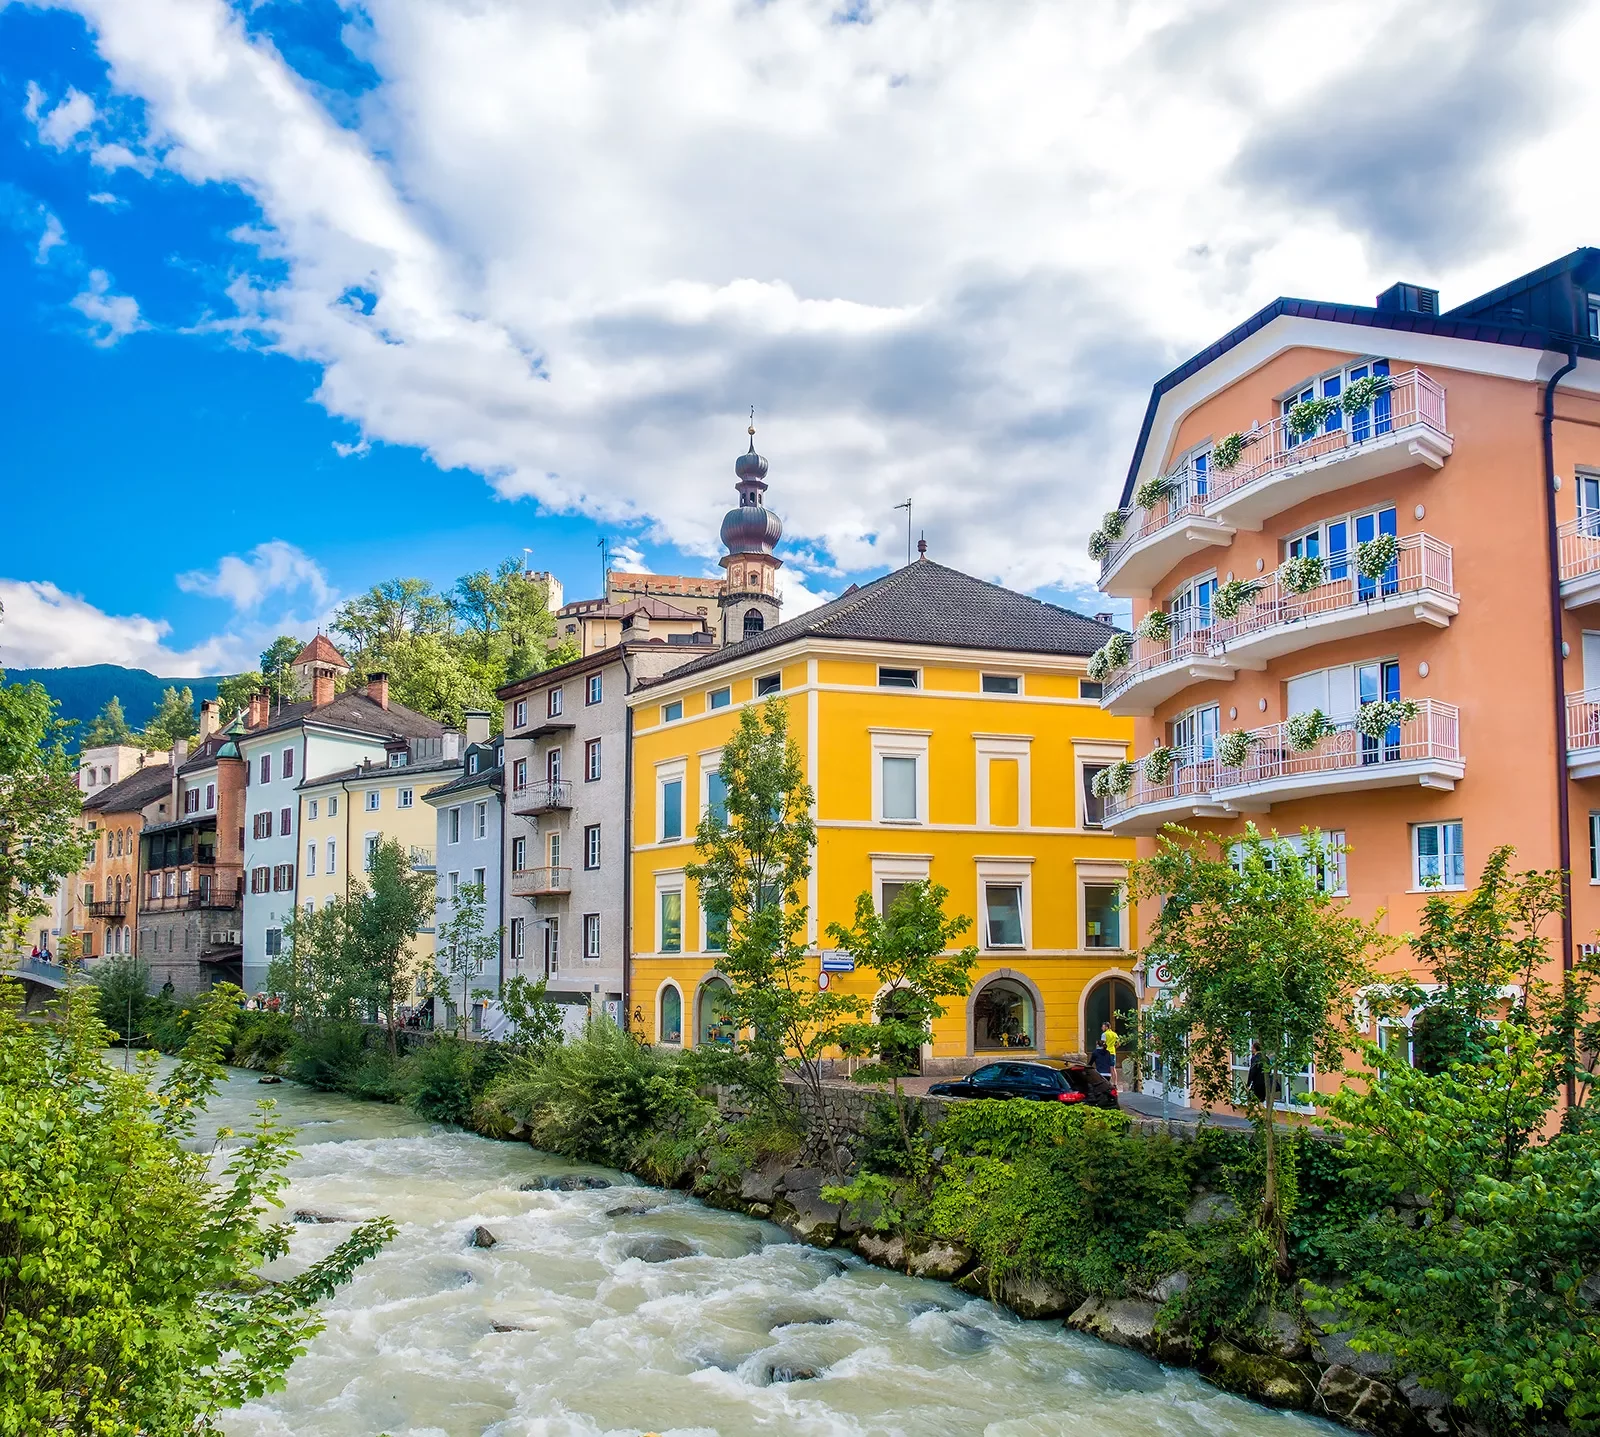 Houses along the Brunico Bruneck River.